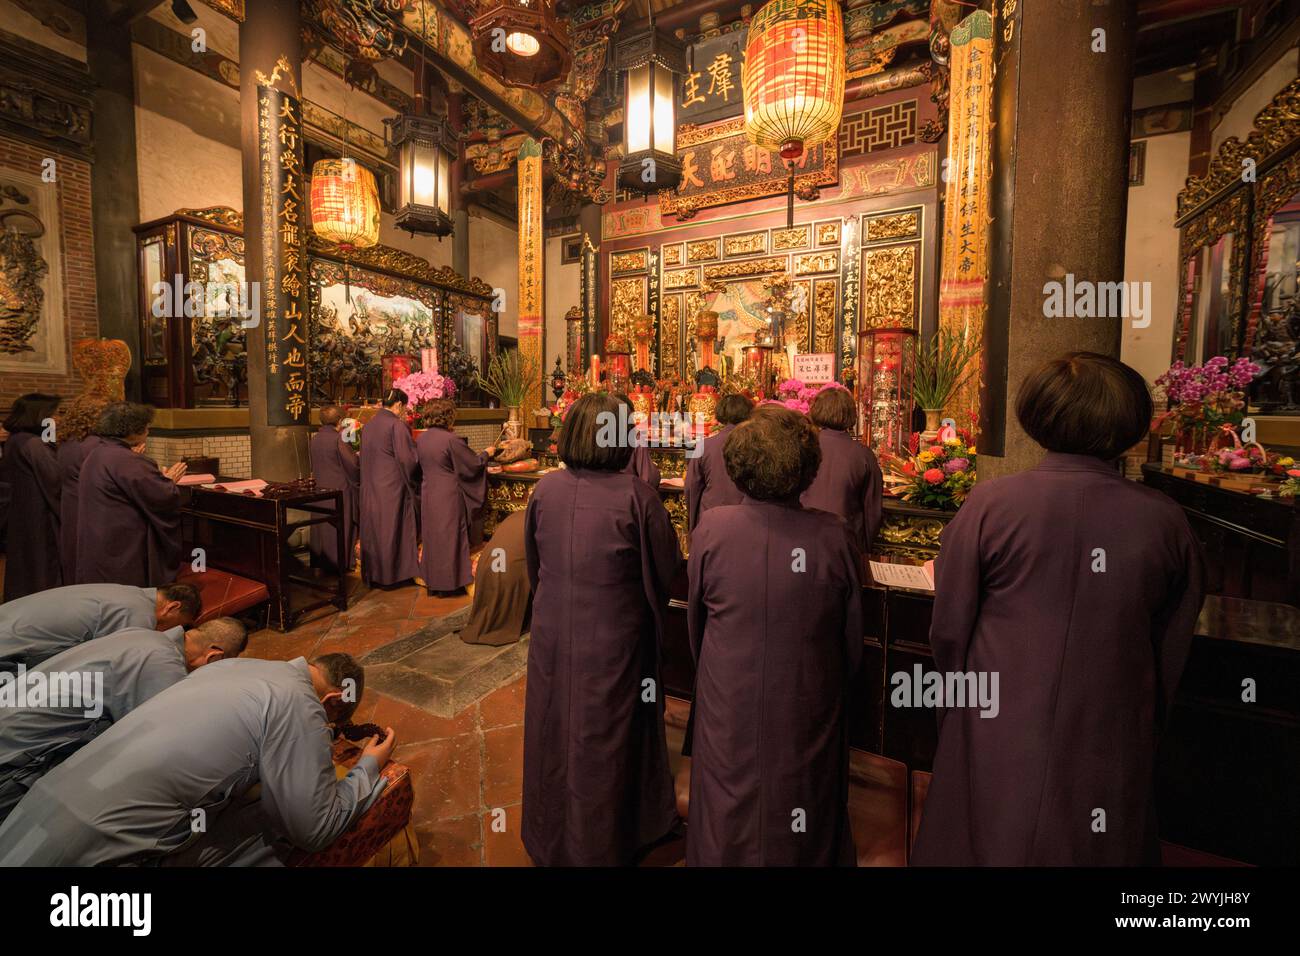 Devotees with offerings during a religious ceremony for the Chinese New Year in Baoan temple Stock Photo